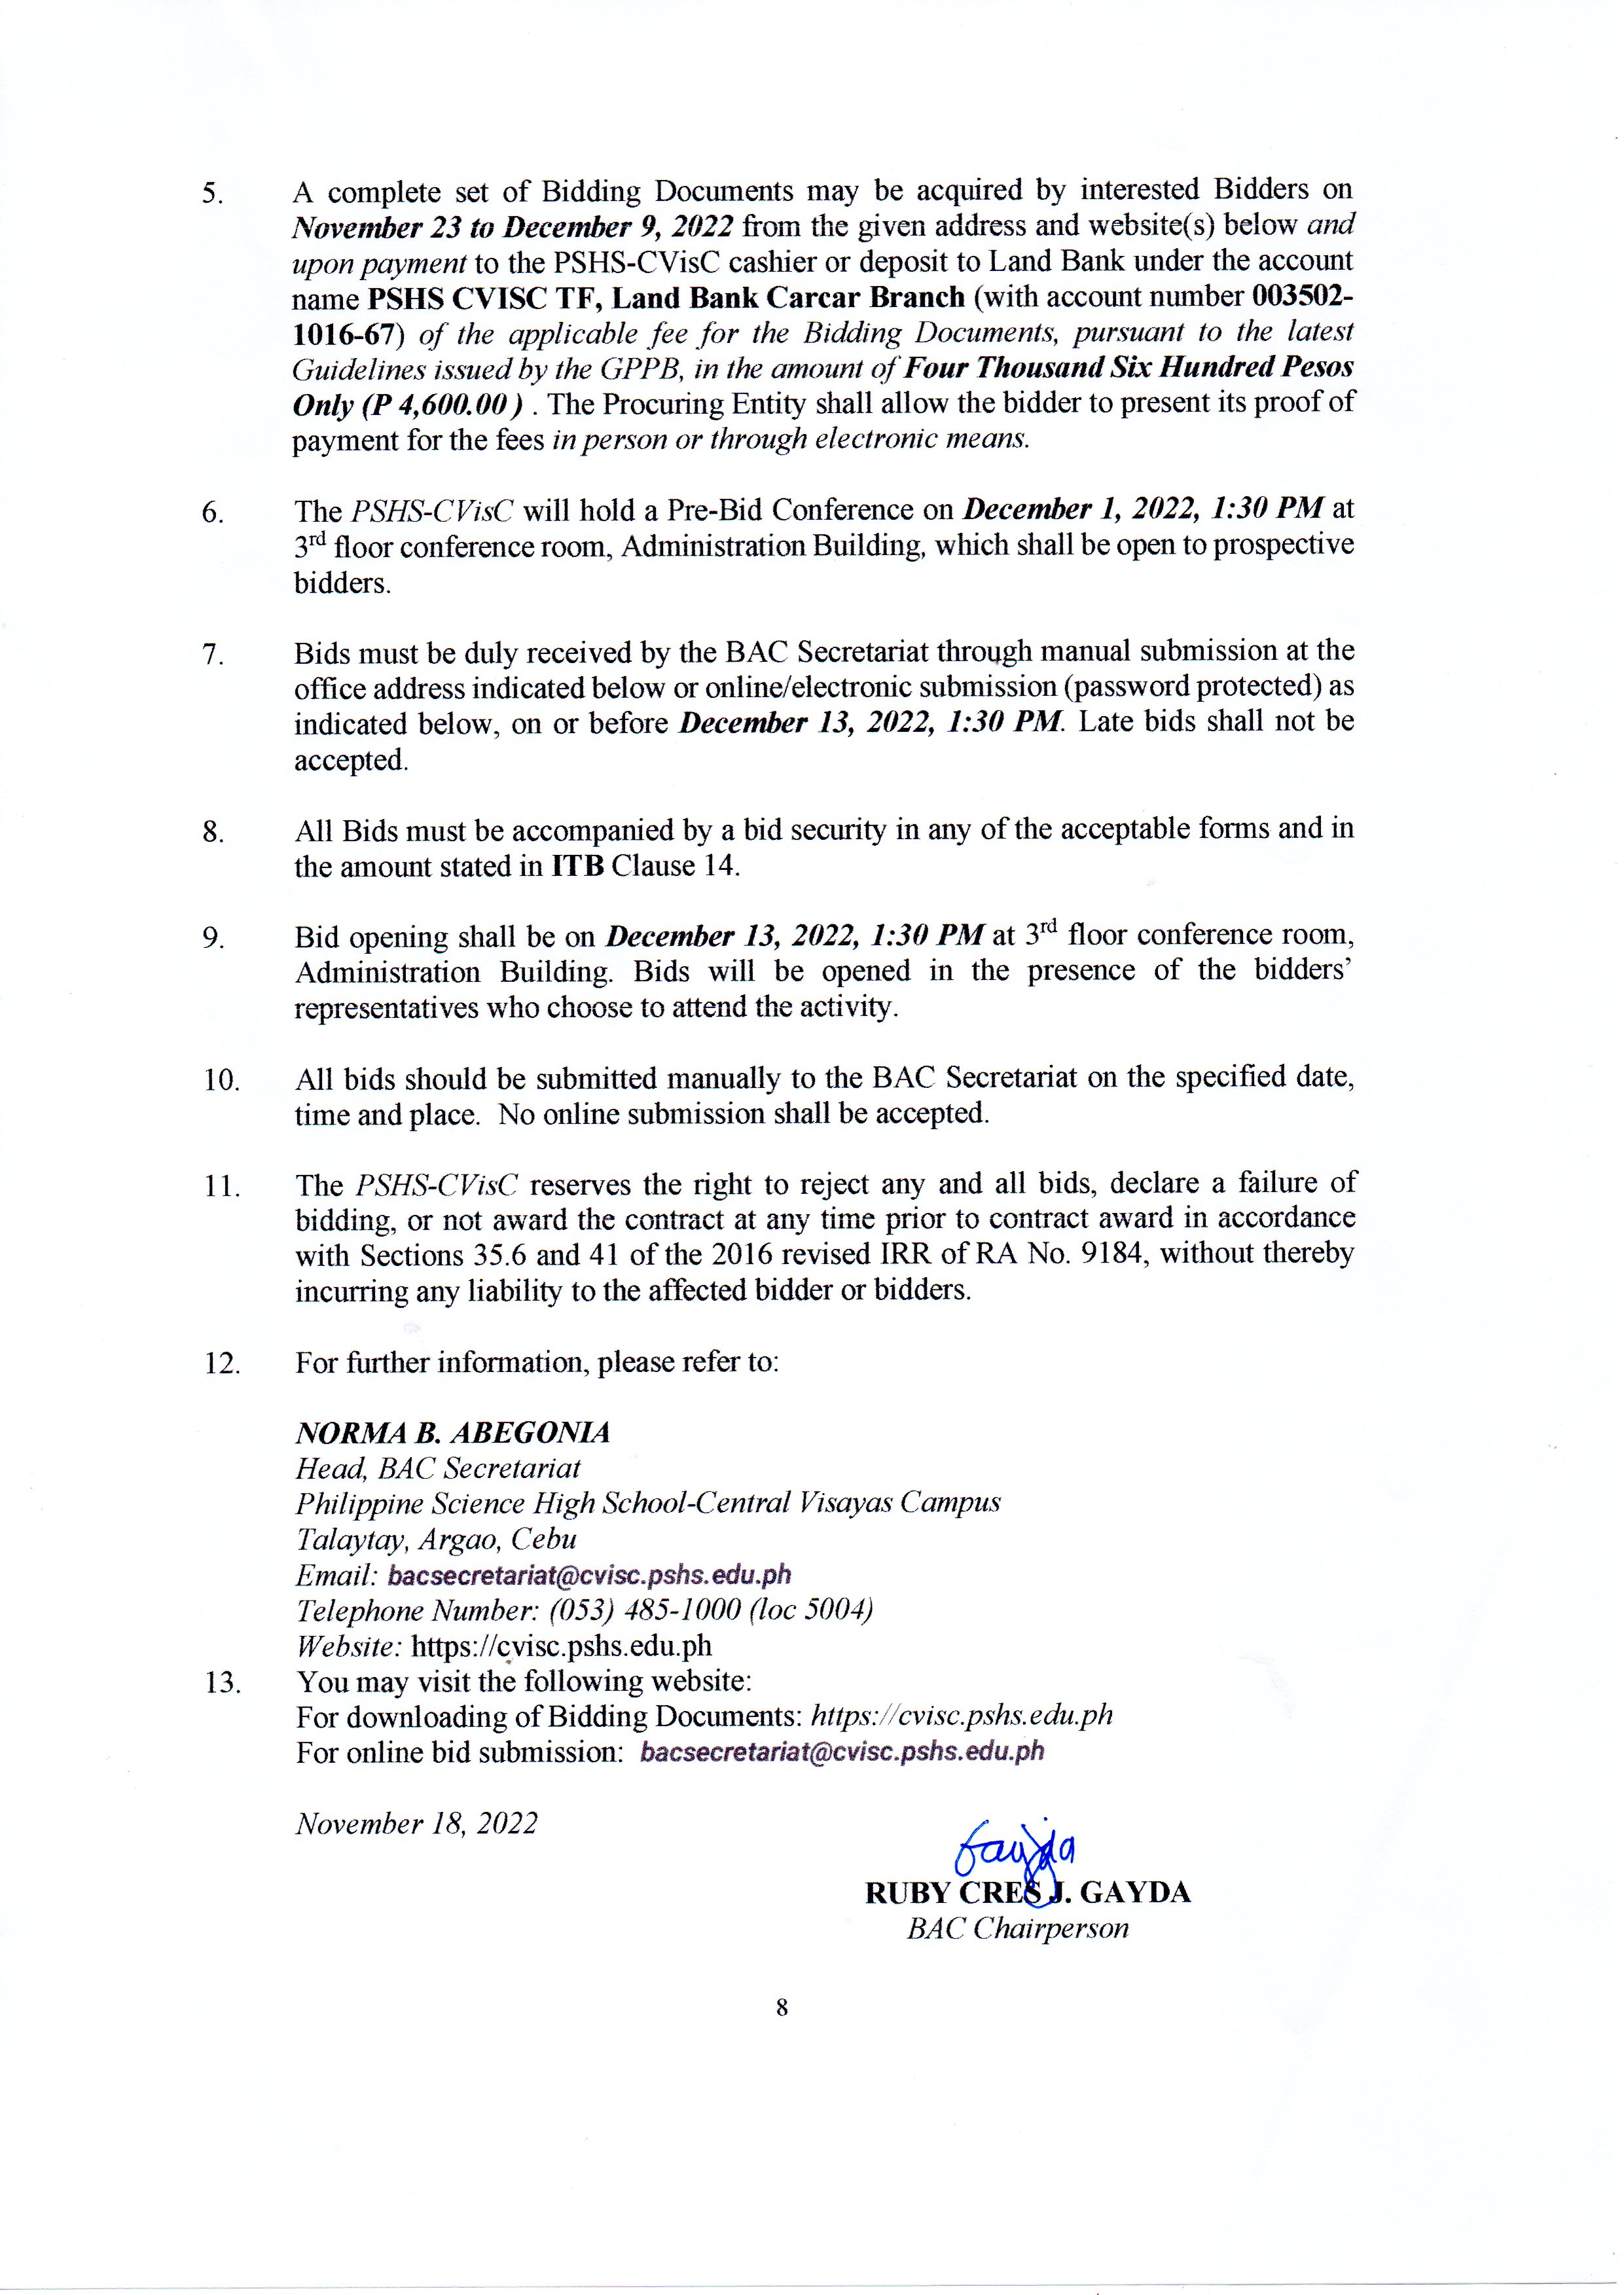 itb provision janitorial services p2of2